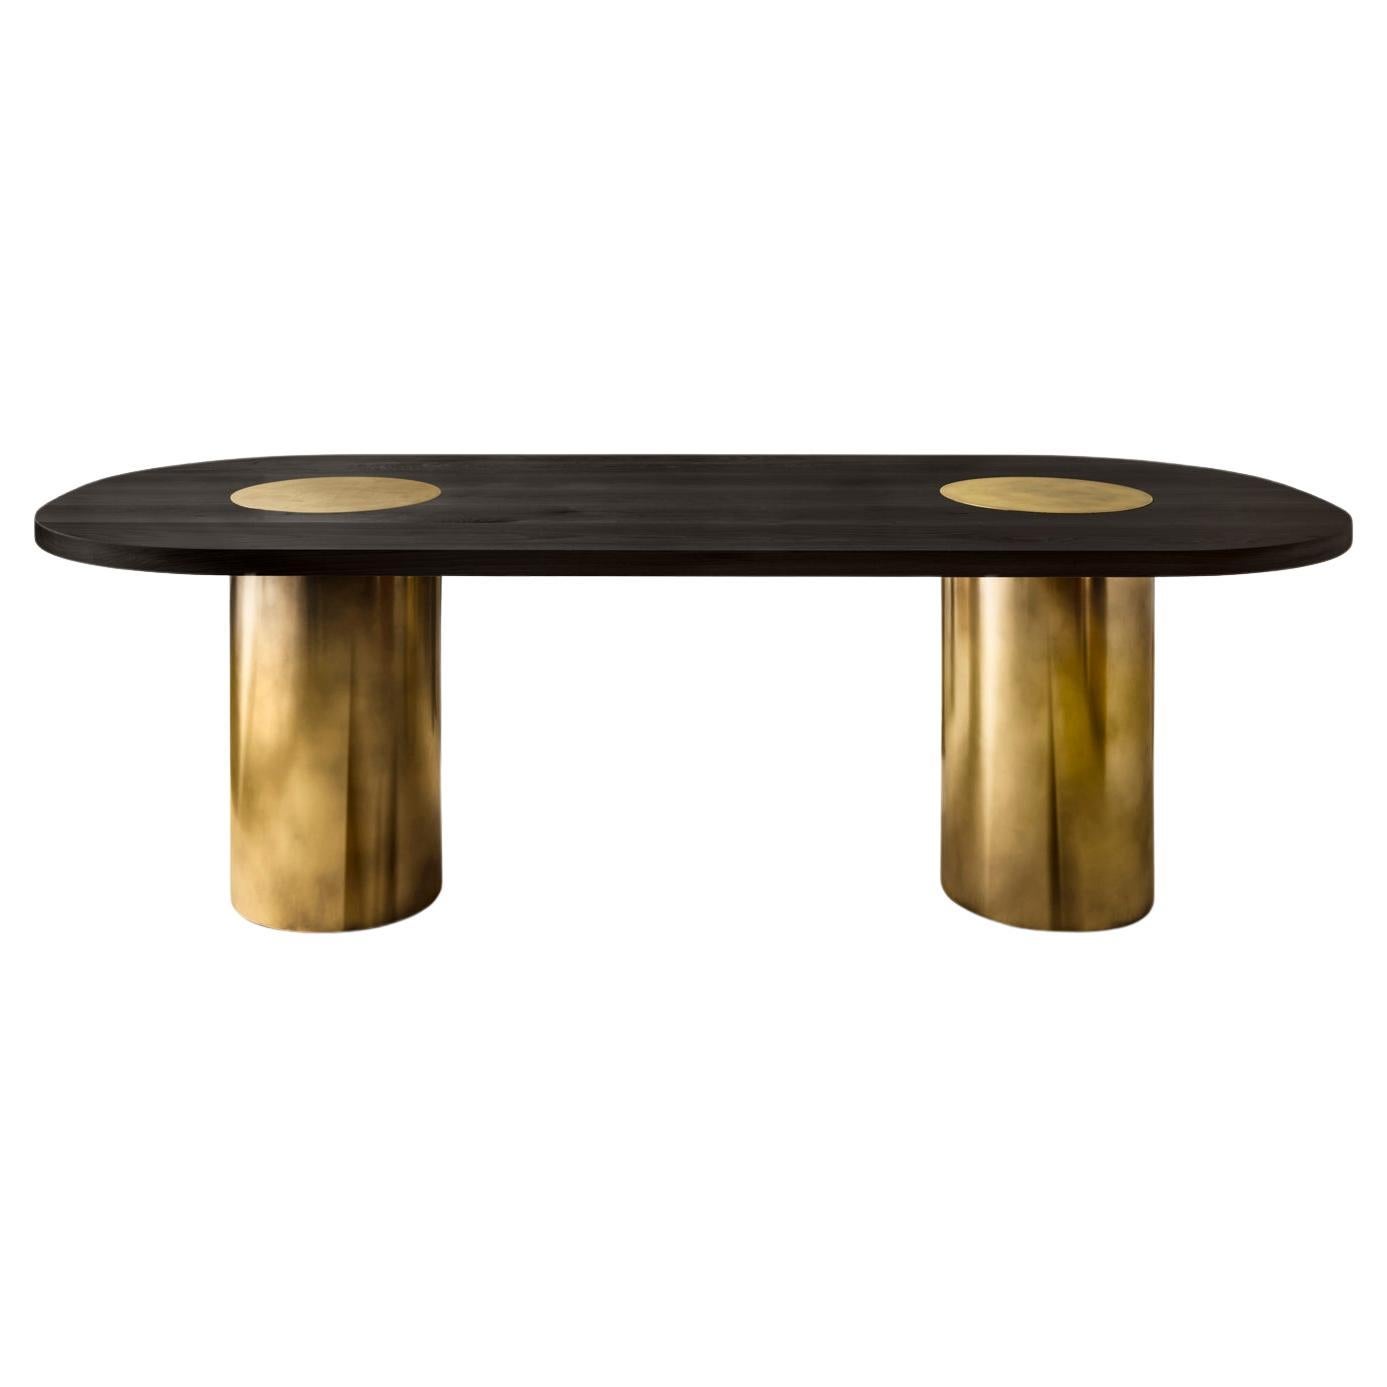 Silo Dining Table - Ebonized Walnut and Burnished Brass For Sale